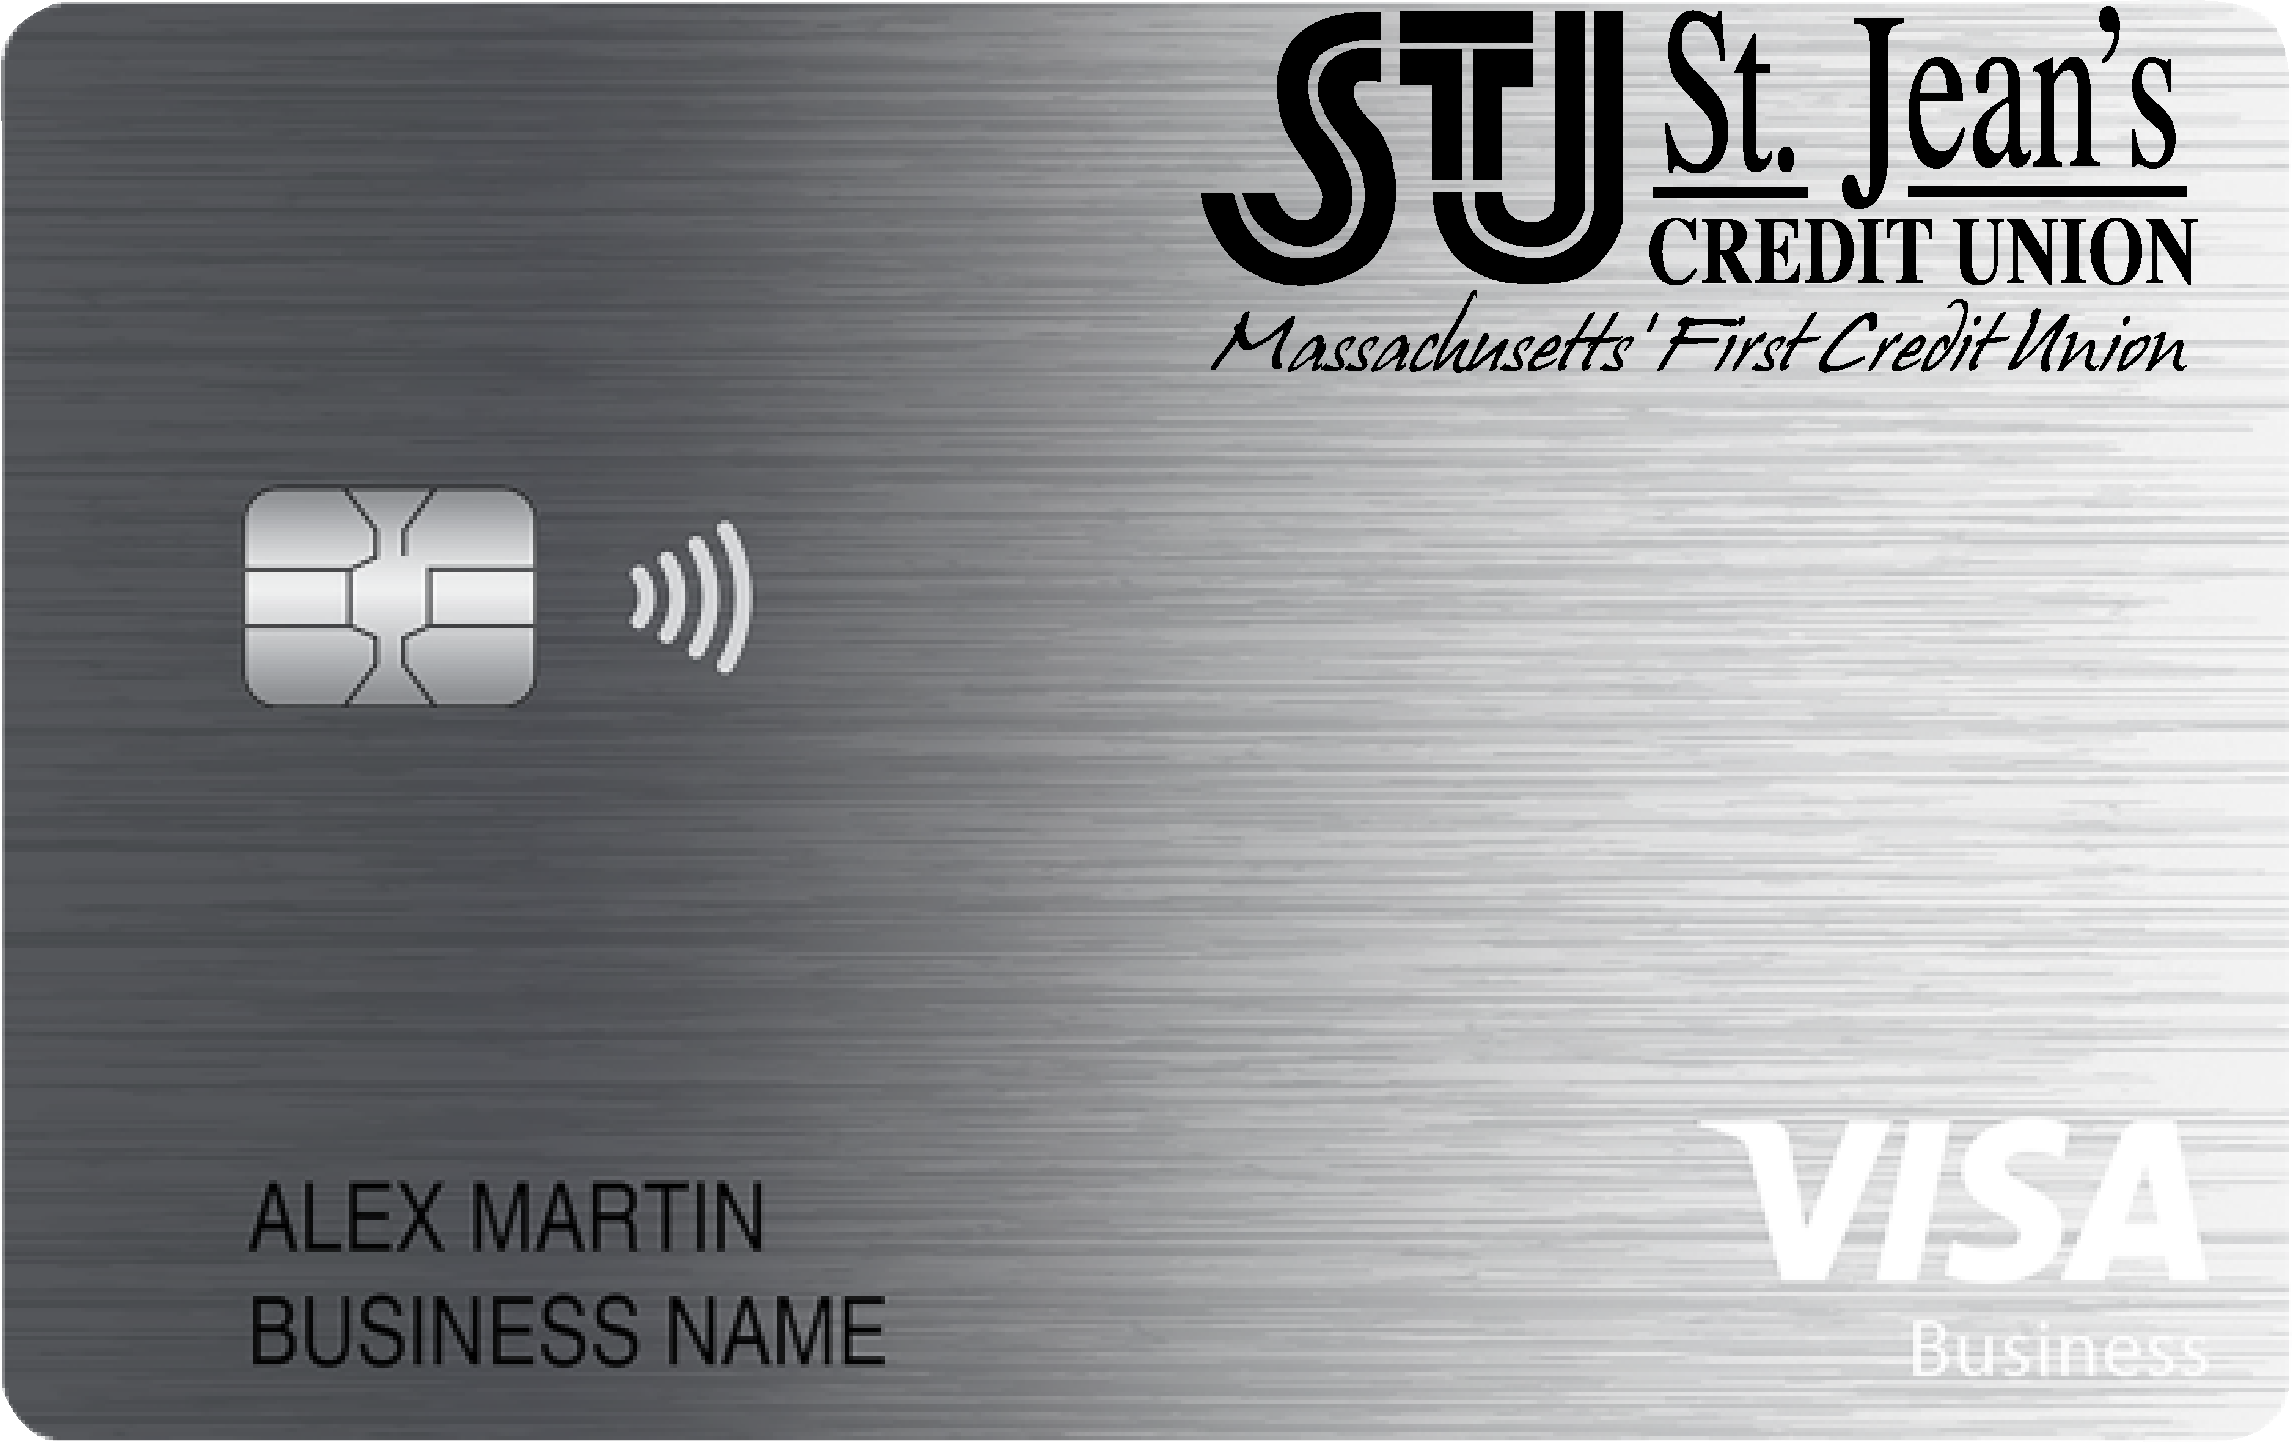 St. Jean's Credit Union Business Card Card